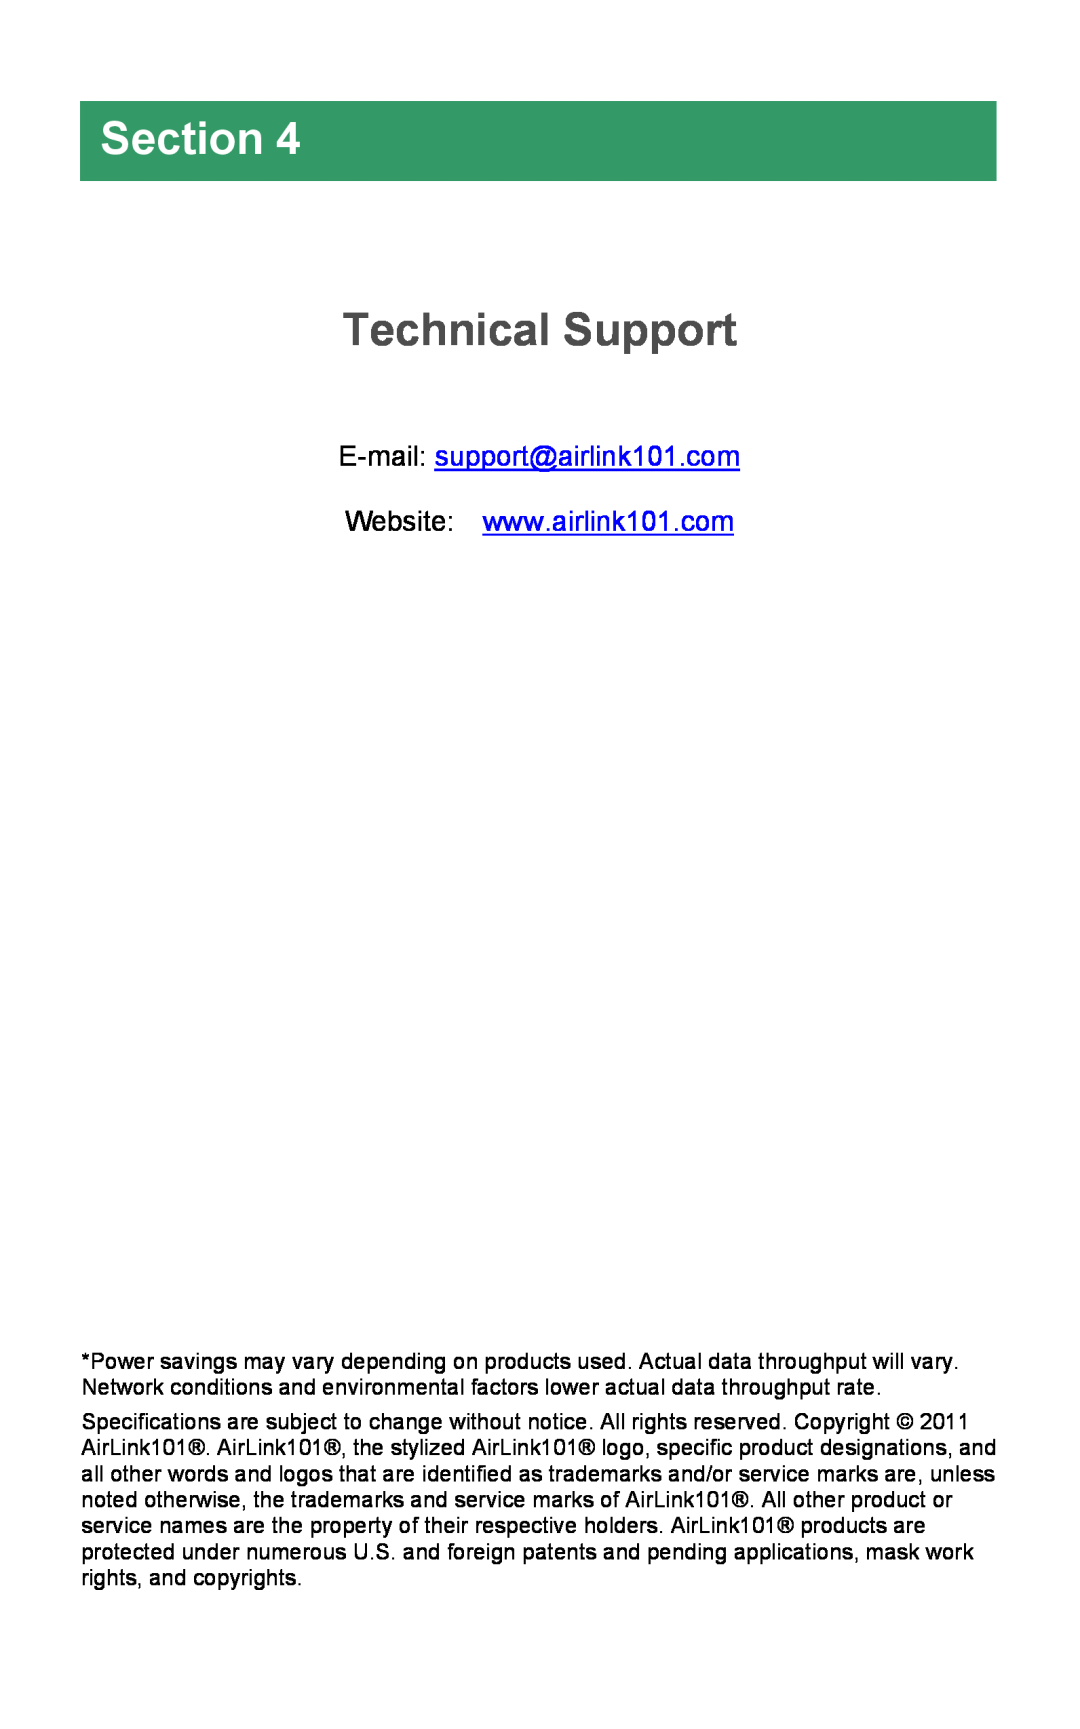 Airlink101 ASW305 manual Technical Support, Section, E-mail support@airlink101.com 